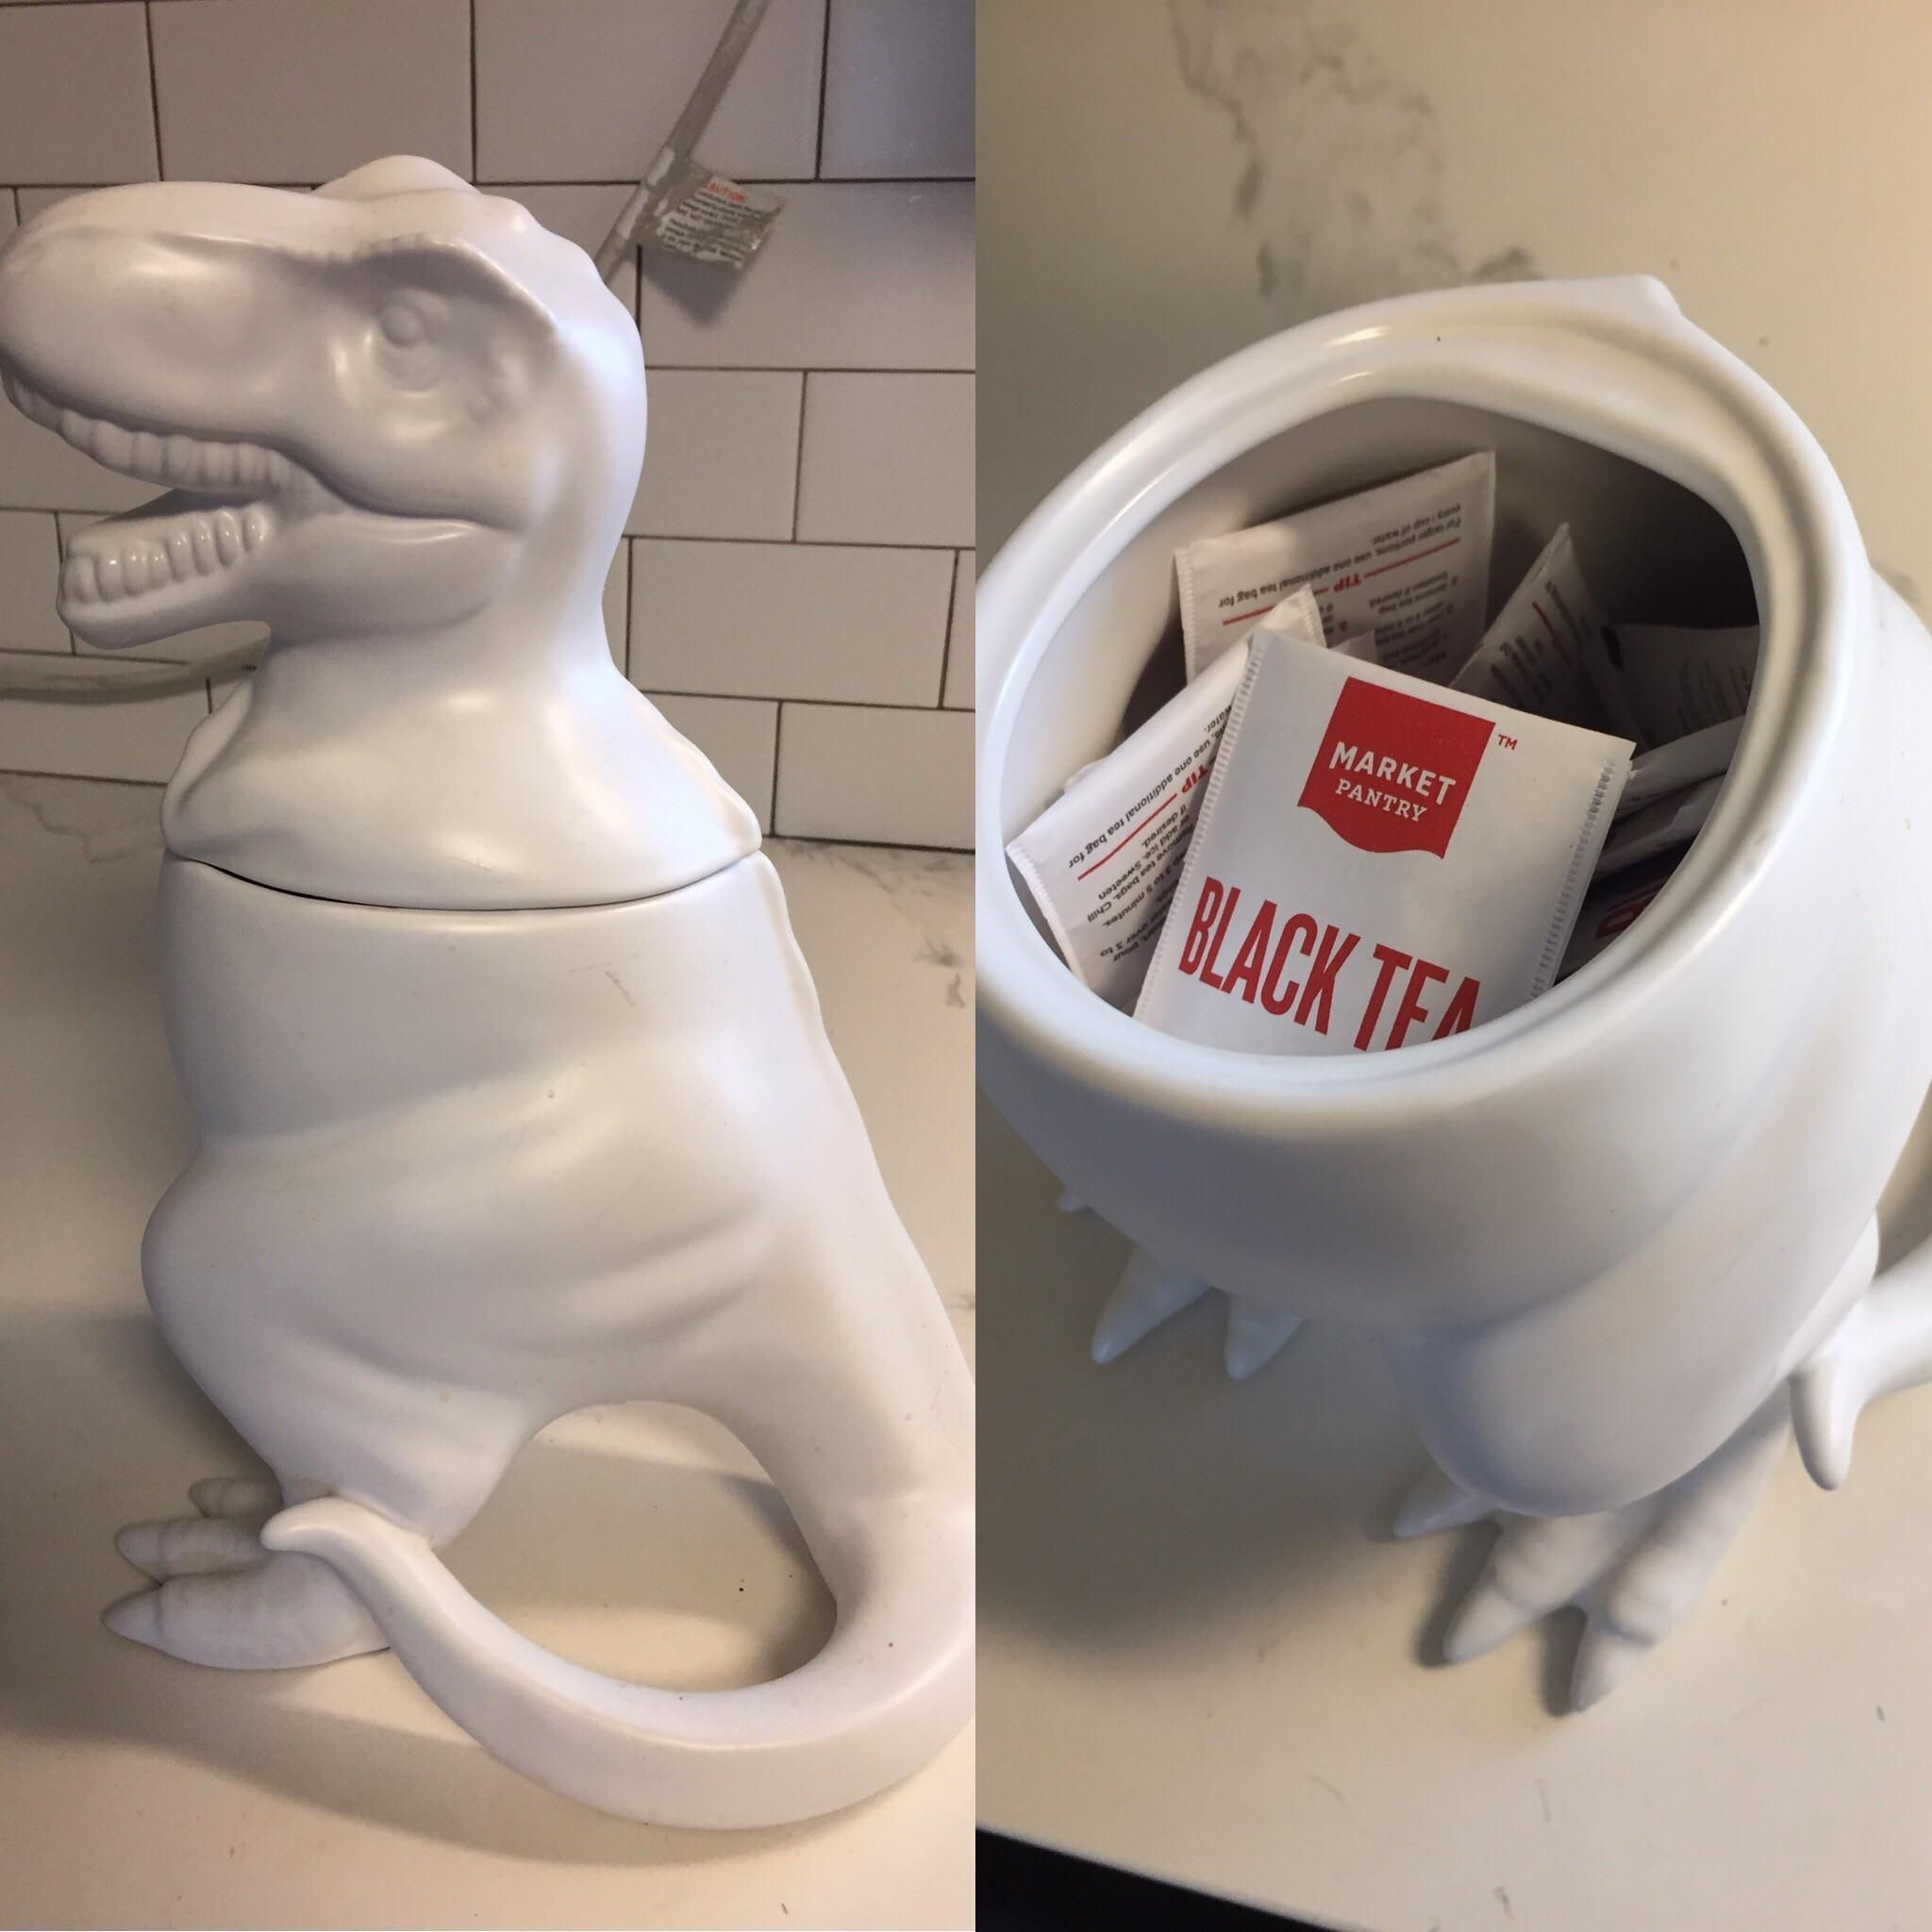 My girlfriend has decided to repurpose our novelty cookie jar. Say hello to our Tea-Rex.